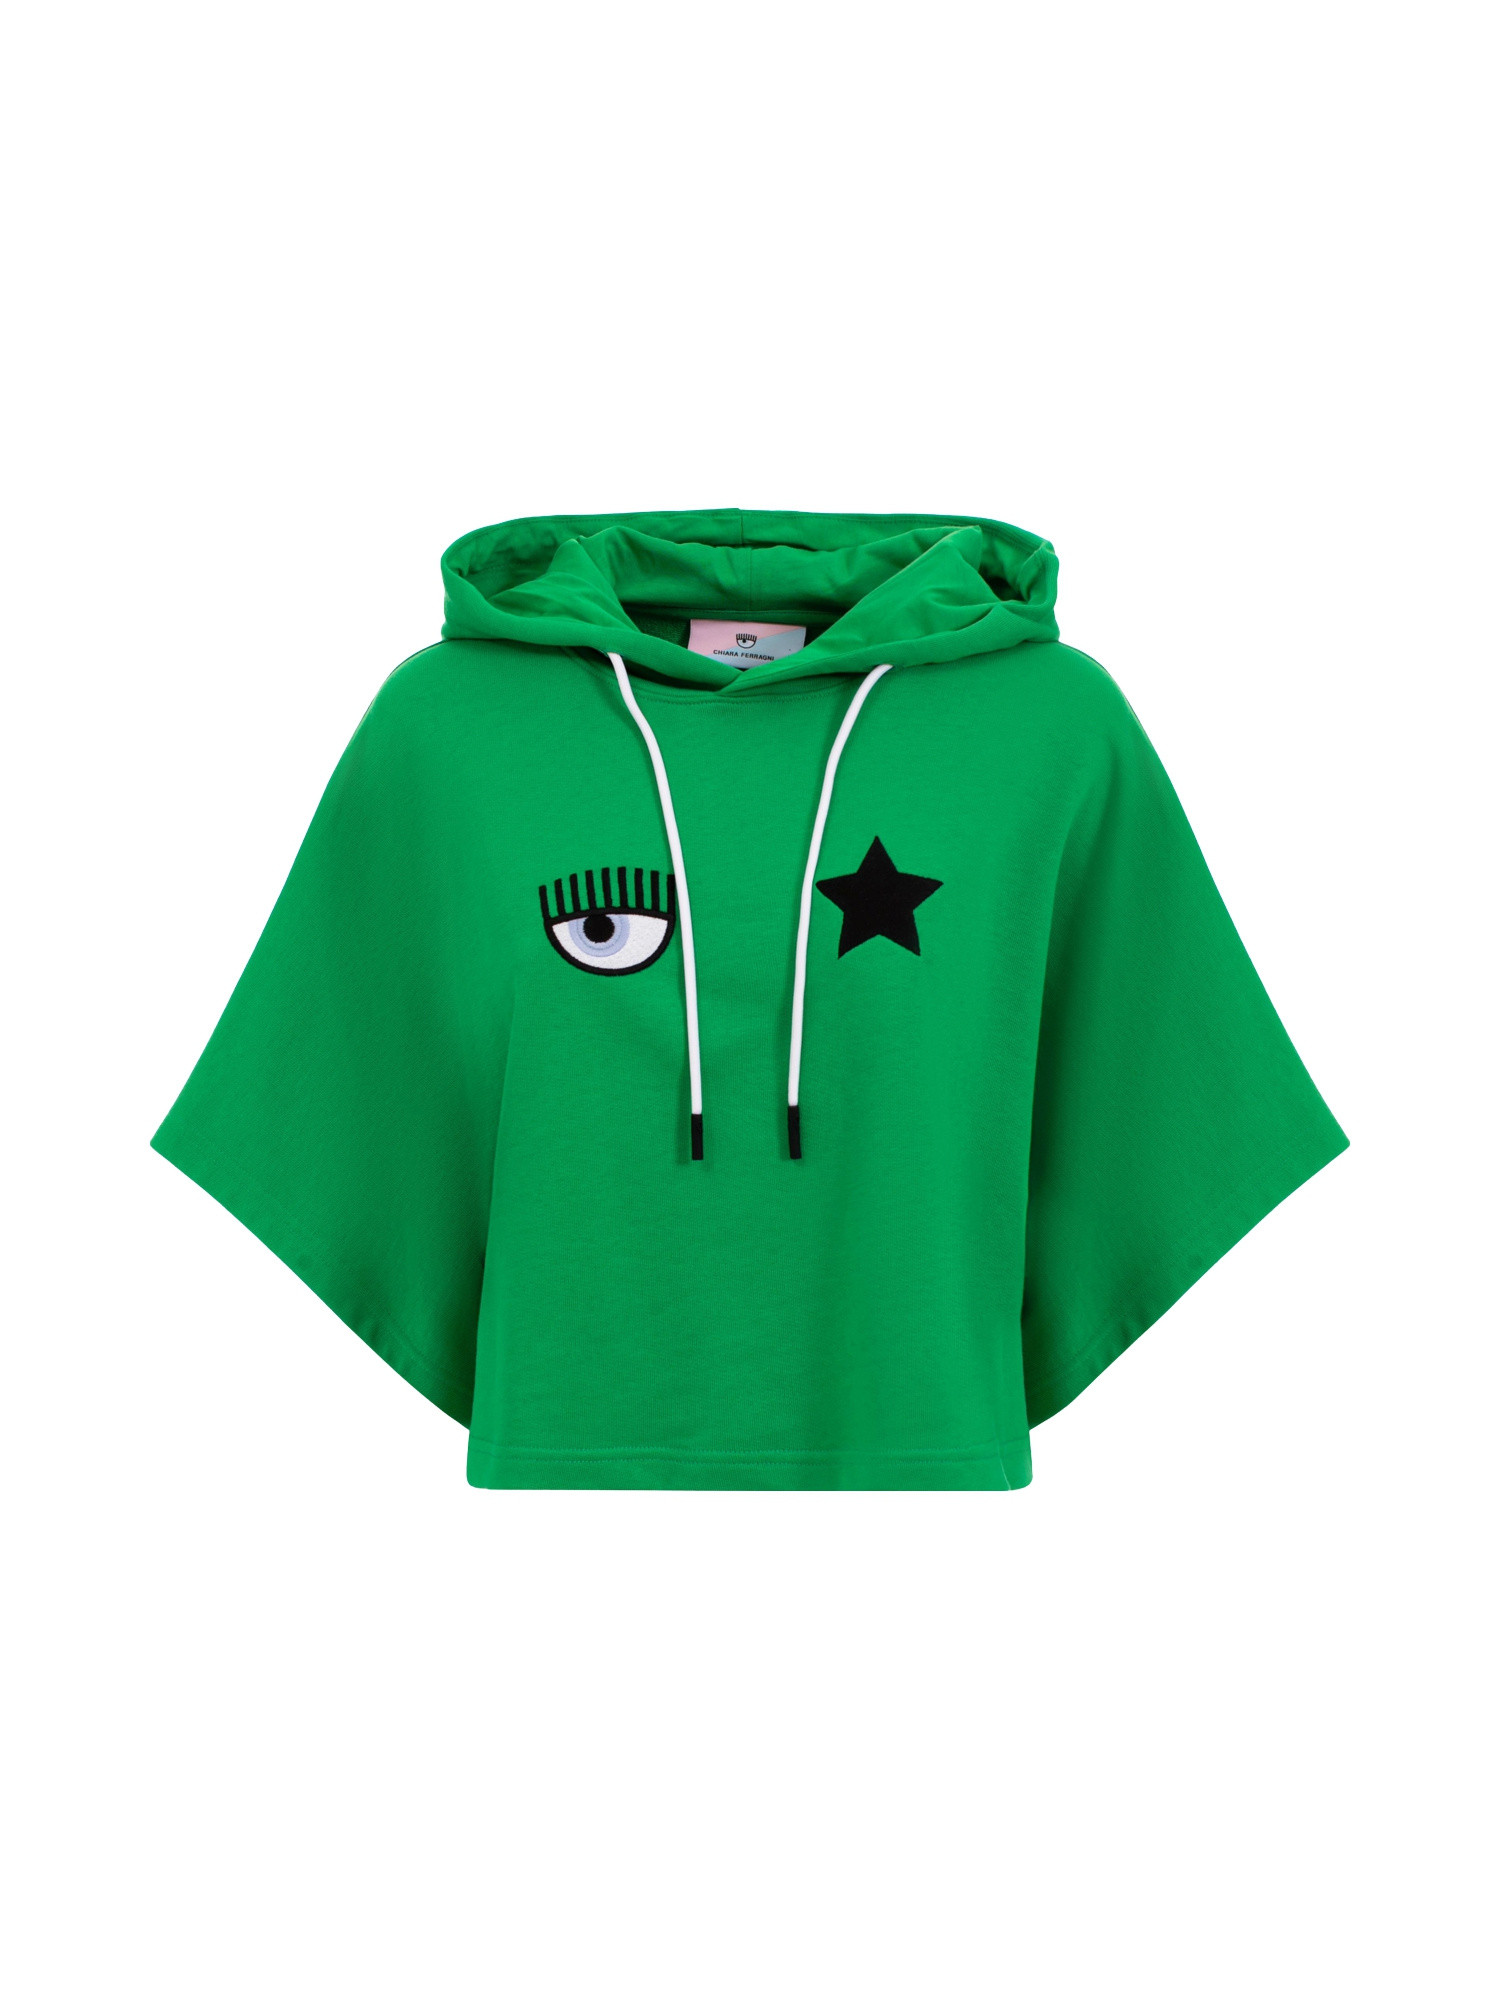 Chiara Ferragni - Sweatshirt with hood and Eye Star embroidery, Green, large image number 0